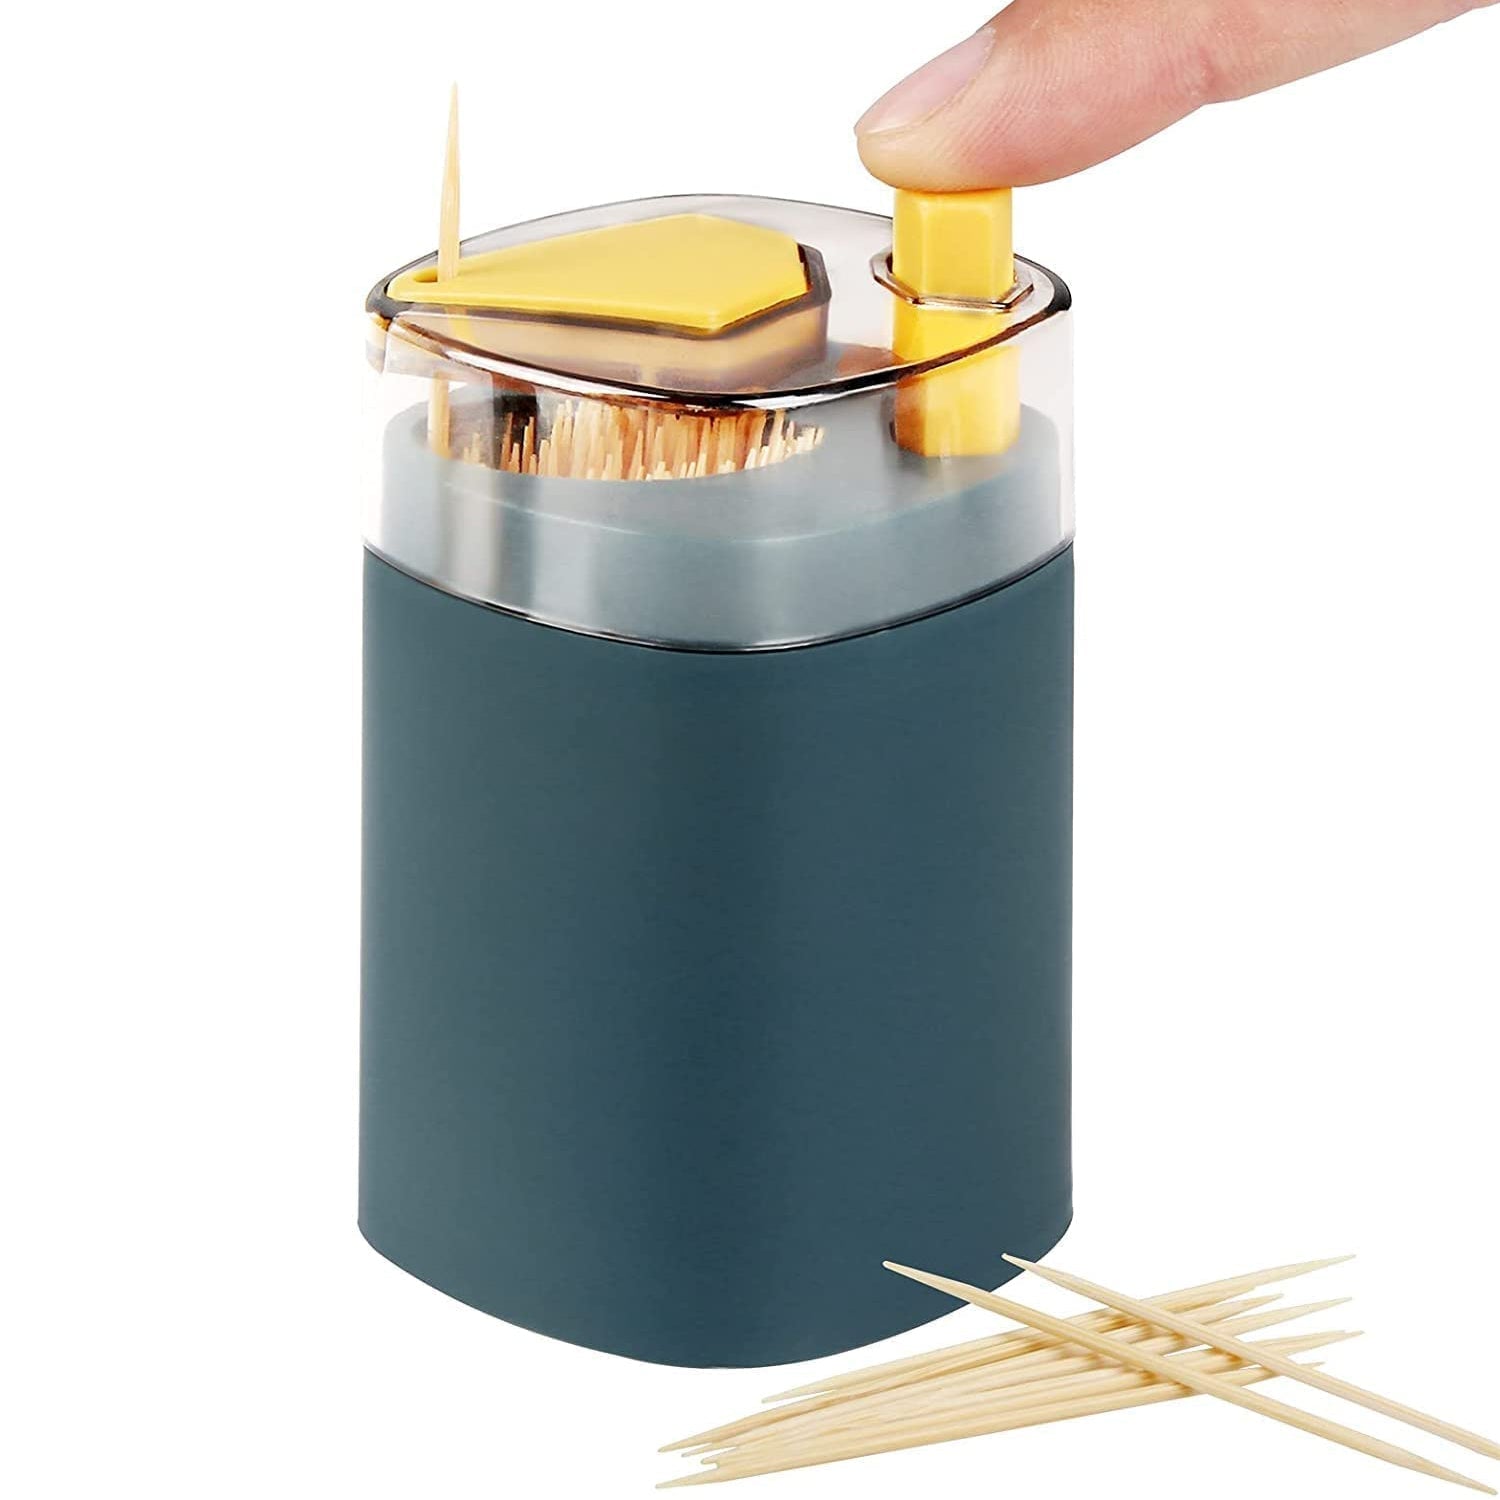 Toothpick Holder Dispenser, Pop-Up Automatic Toothpick Dispenser for Kitchen Restaurant Thickening Toothpicks Container Pocket Novelty, Safe Container Toothpick Storage Box